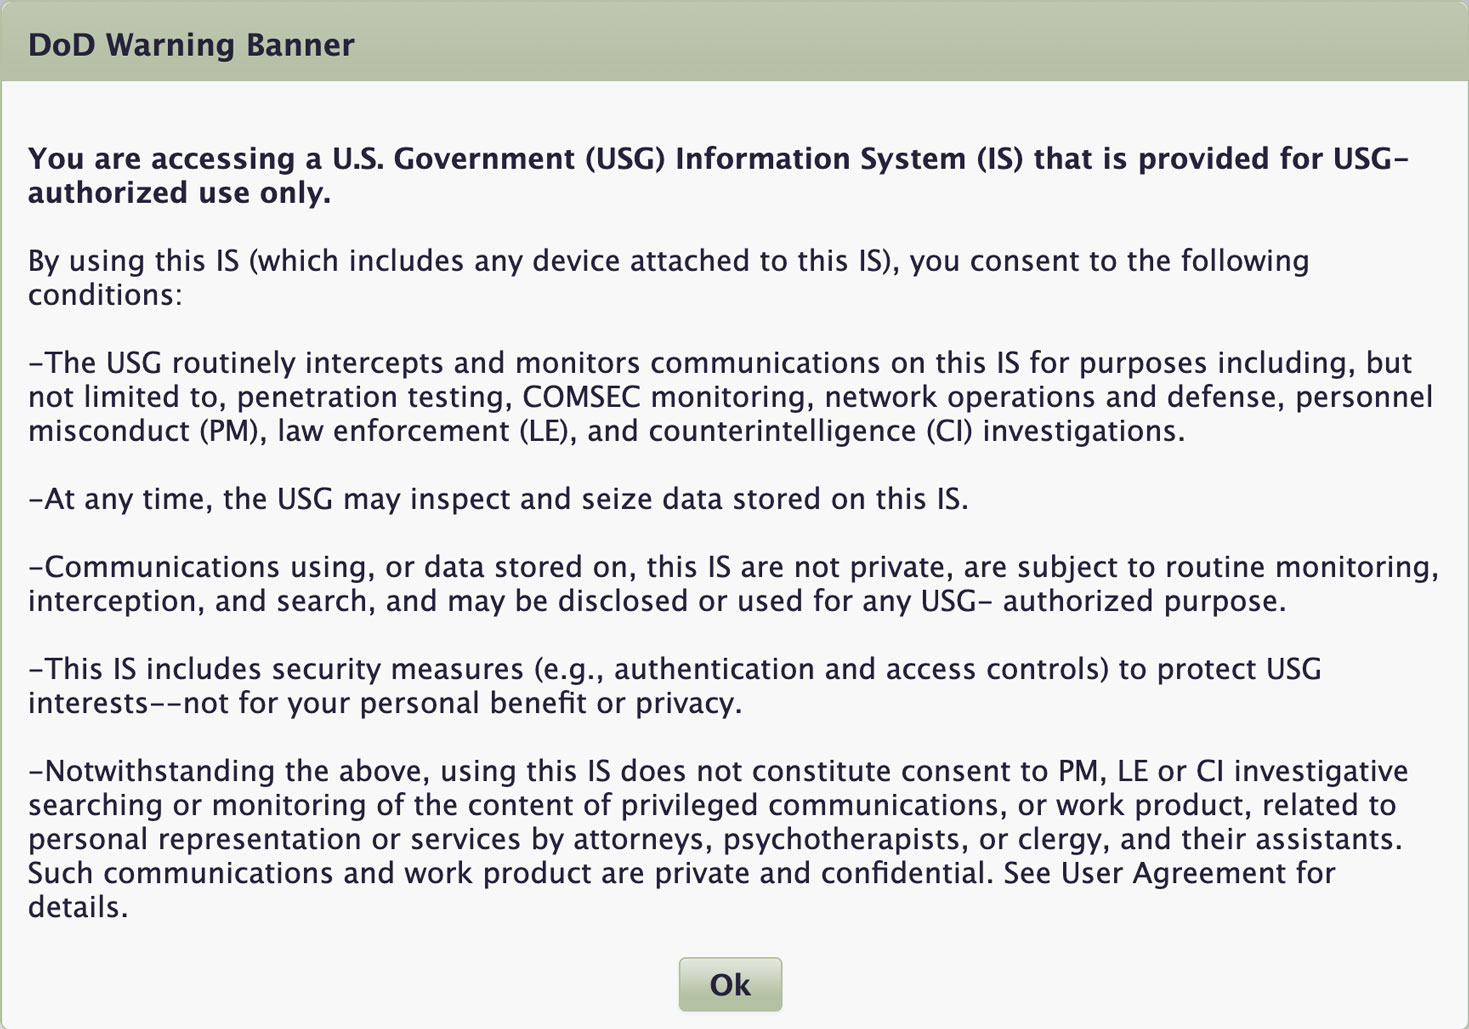 Warning: You are accessing a US Government Information System